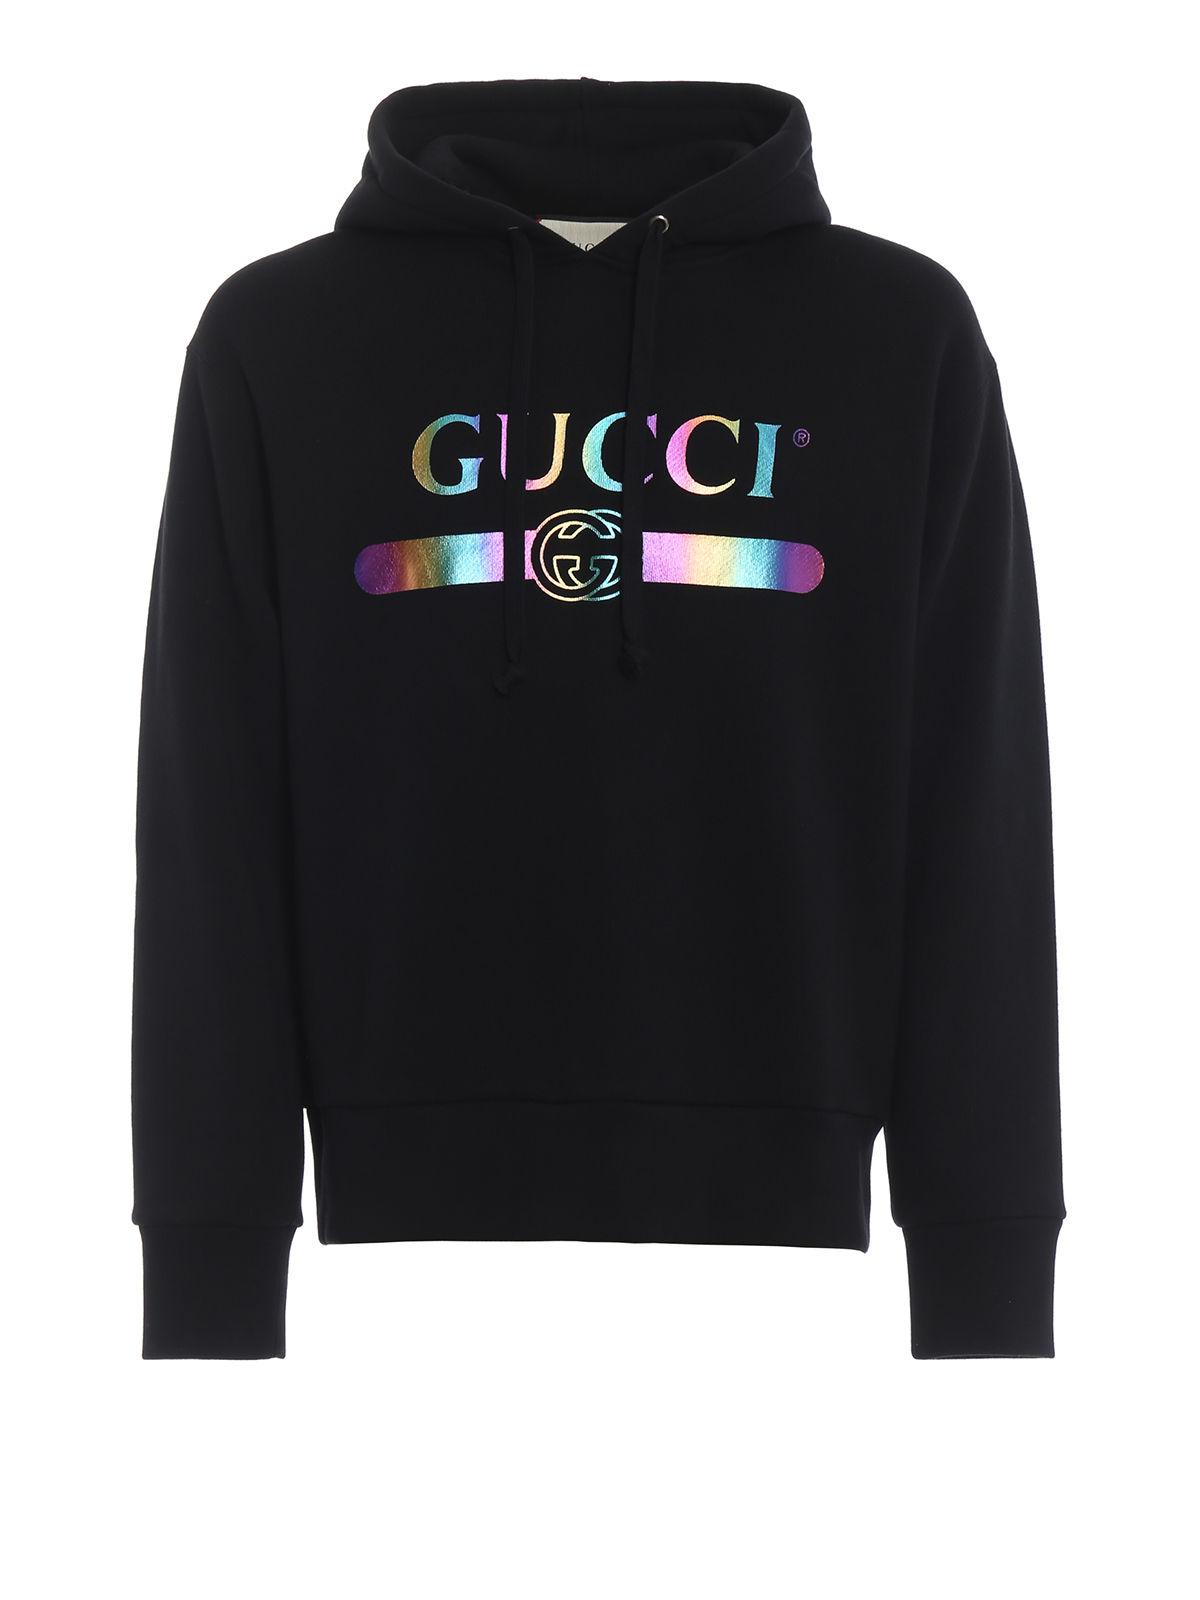 Gucci Hologram Hoodie Online Store, UP 